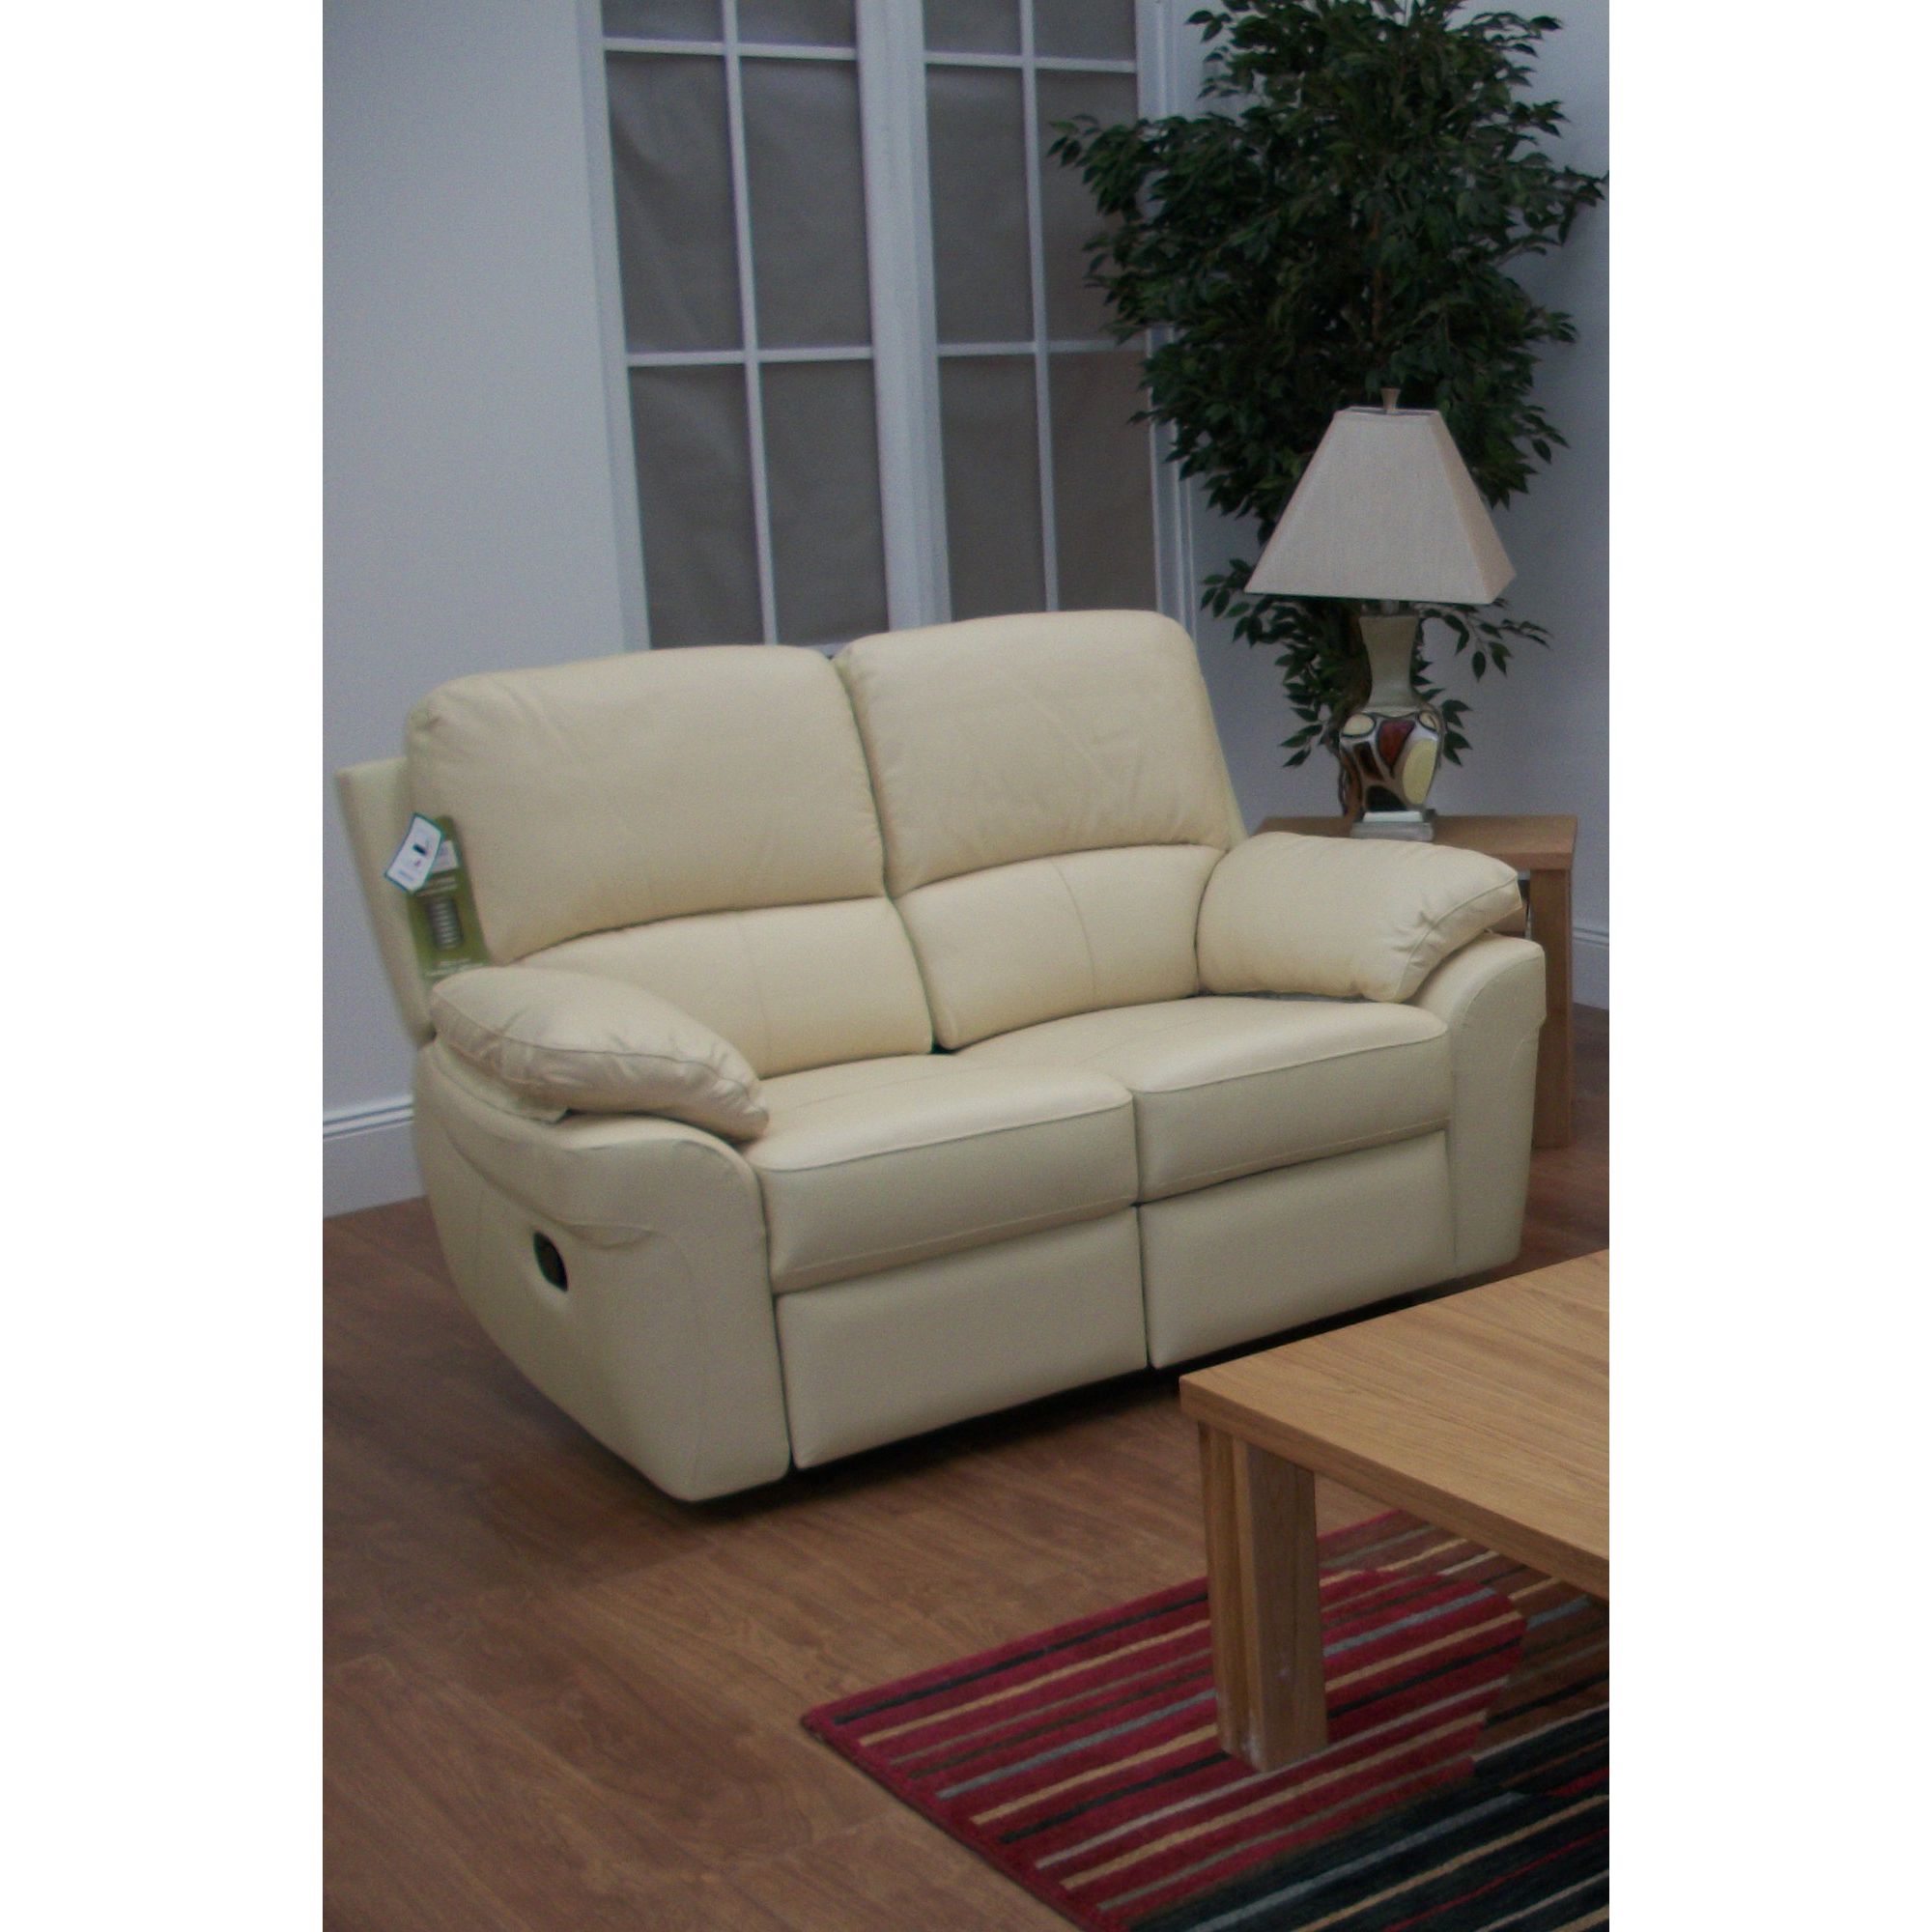 Furniture Link Monzano Two Fixed Seat Sofa in Ivory - Black at Tesco Direct